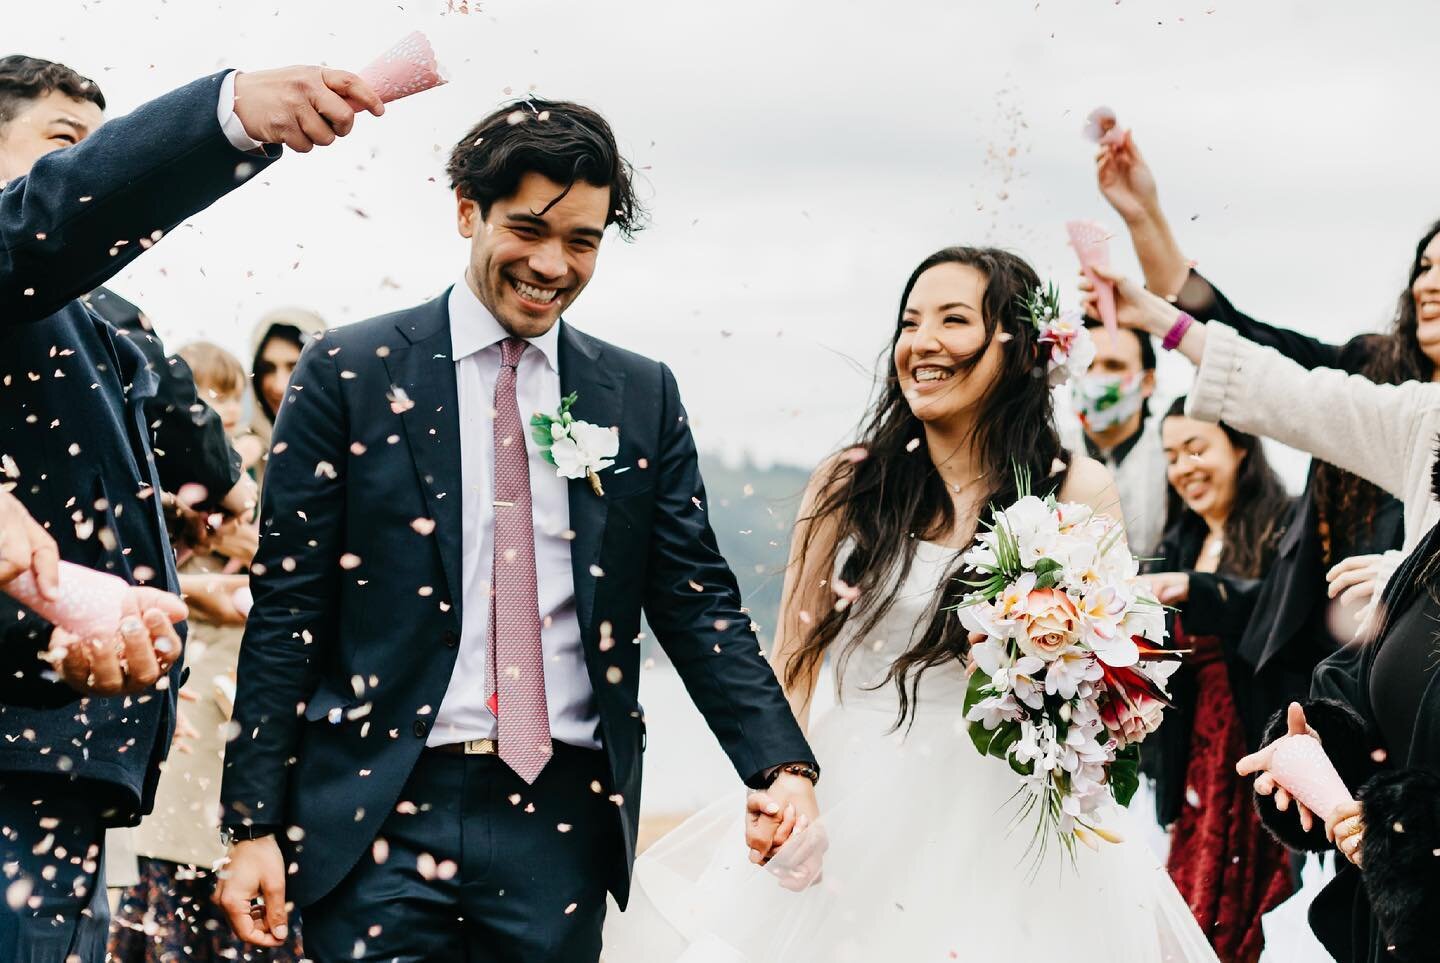 No rain or grey skies could put a damper on Miko and Justin&rsquo;s sweet wedding 🤍🌦

These two are the first couple to connect with me through @portlandincolor and I couldn&rsquo;t have been more honored to shoot their wedding. I loved seeing how 